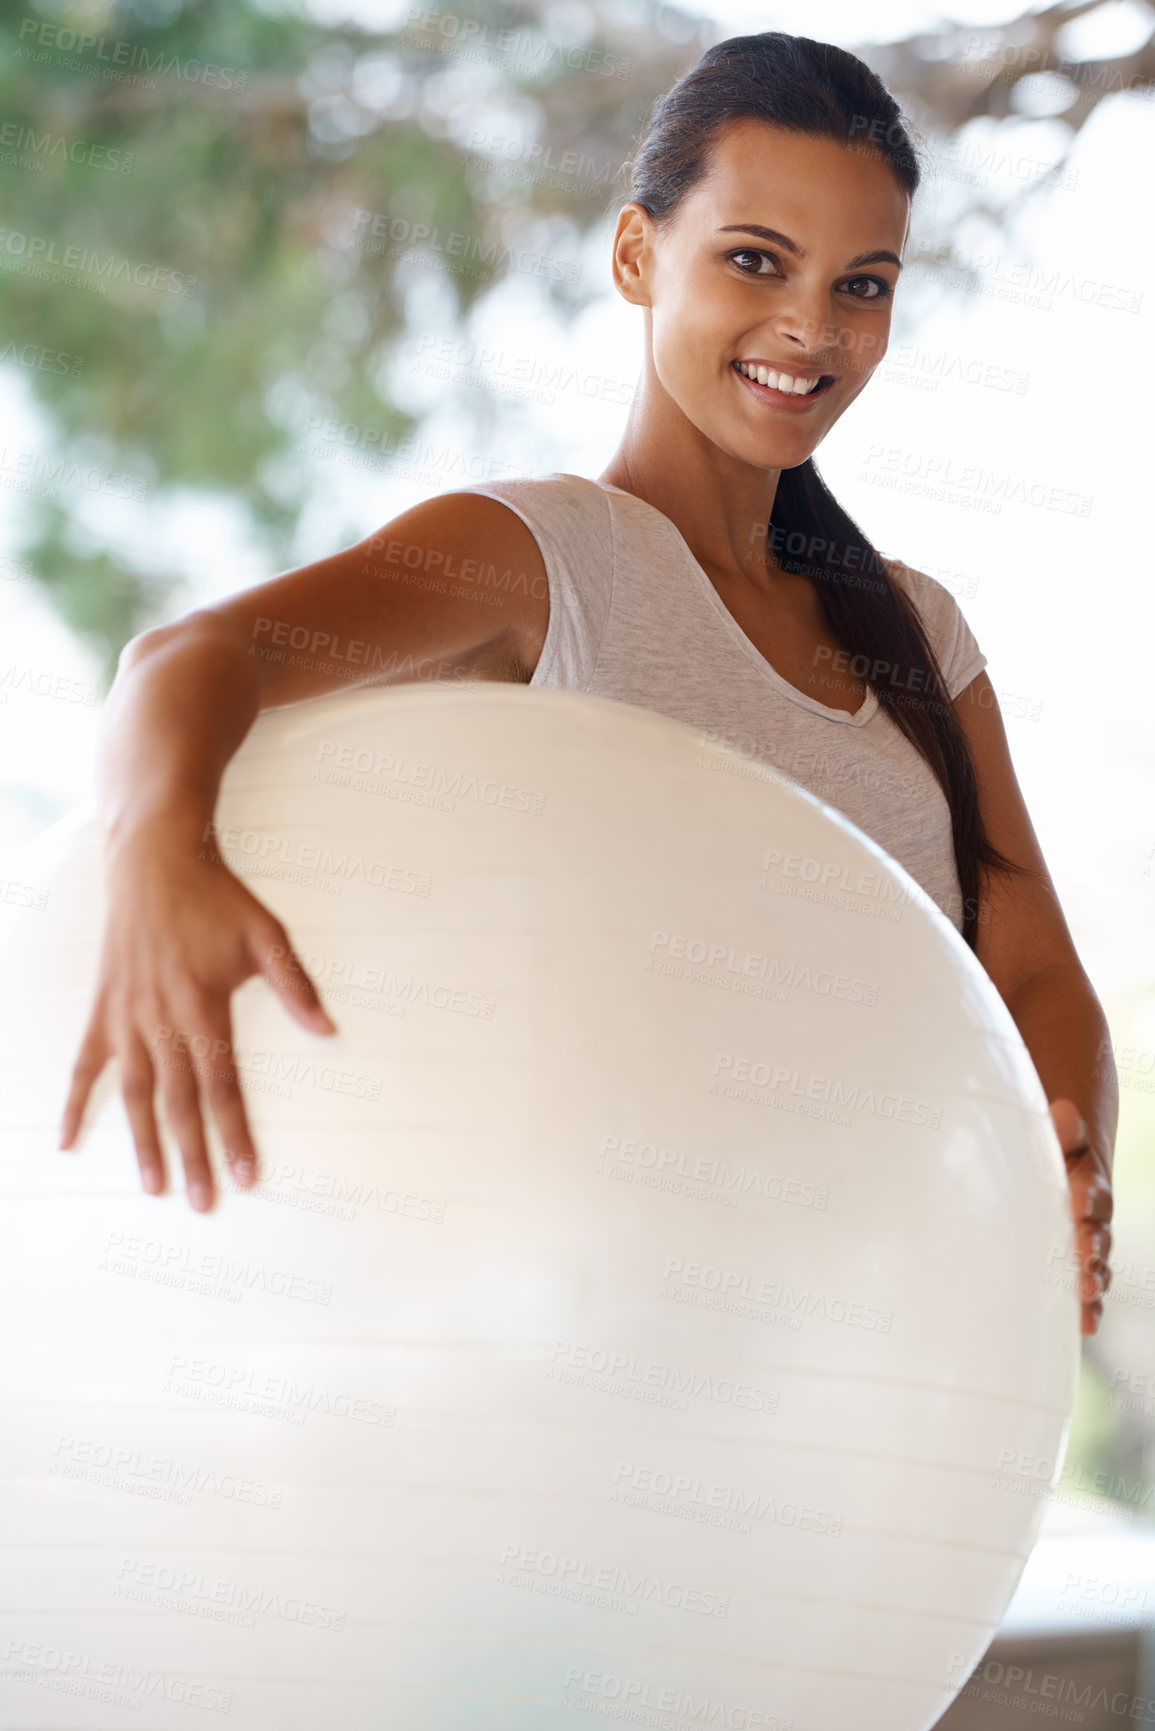 Buy stock photo Portrait of an attractive young woman holding an exercise ball